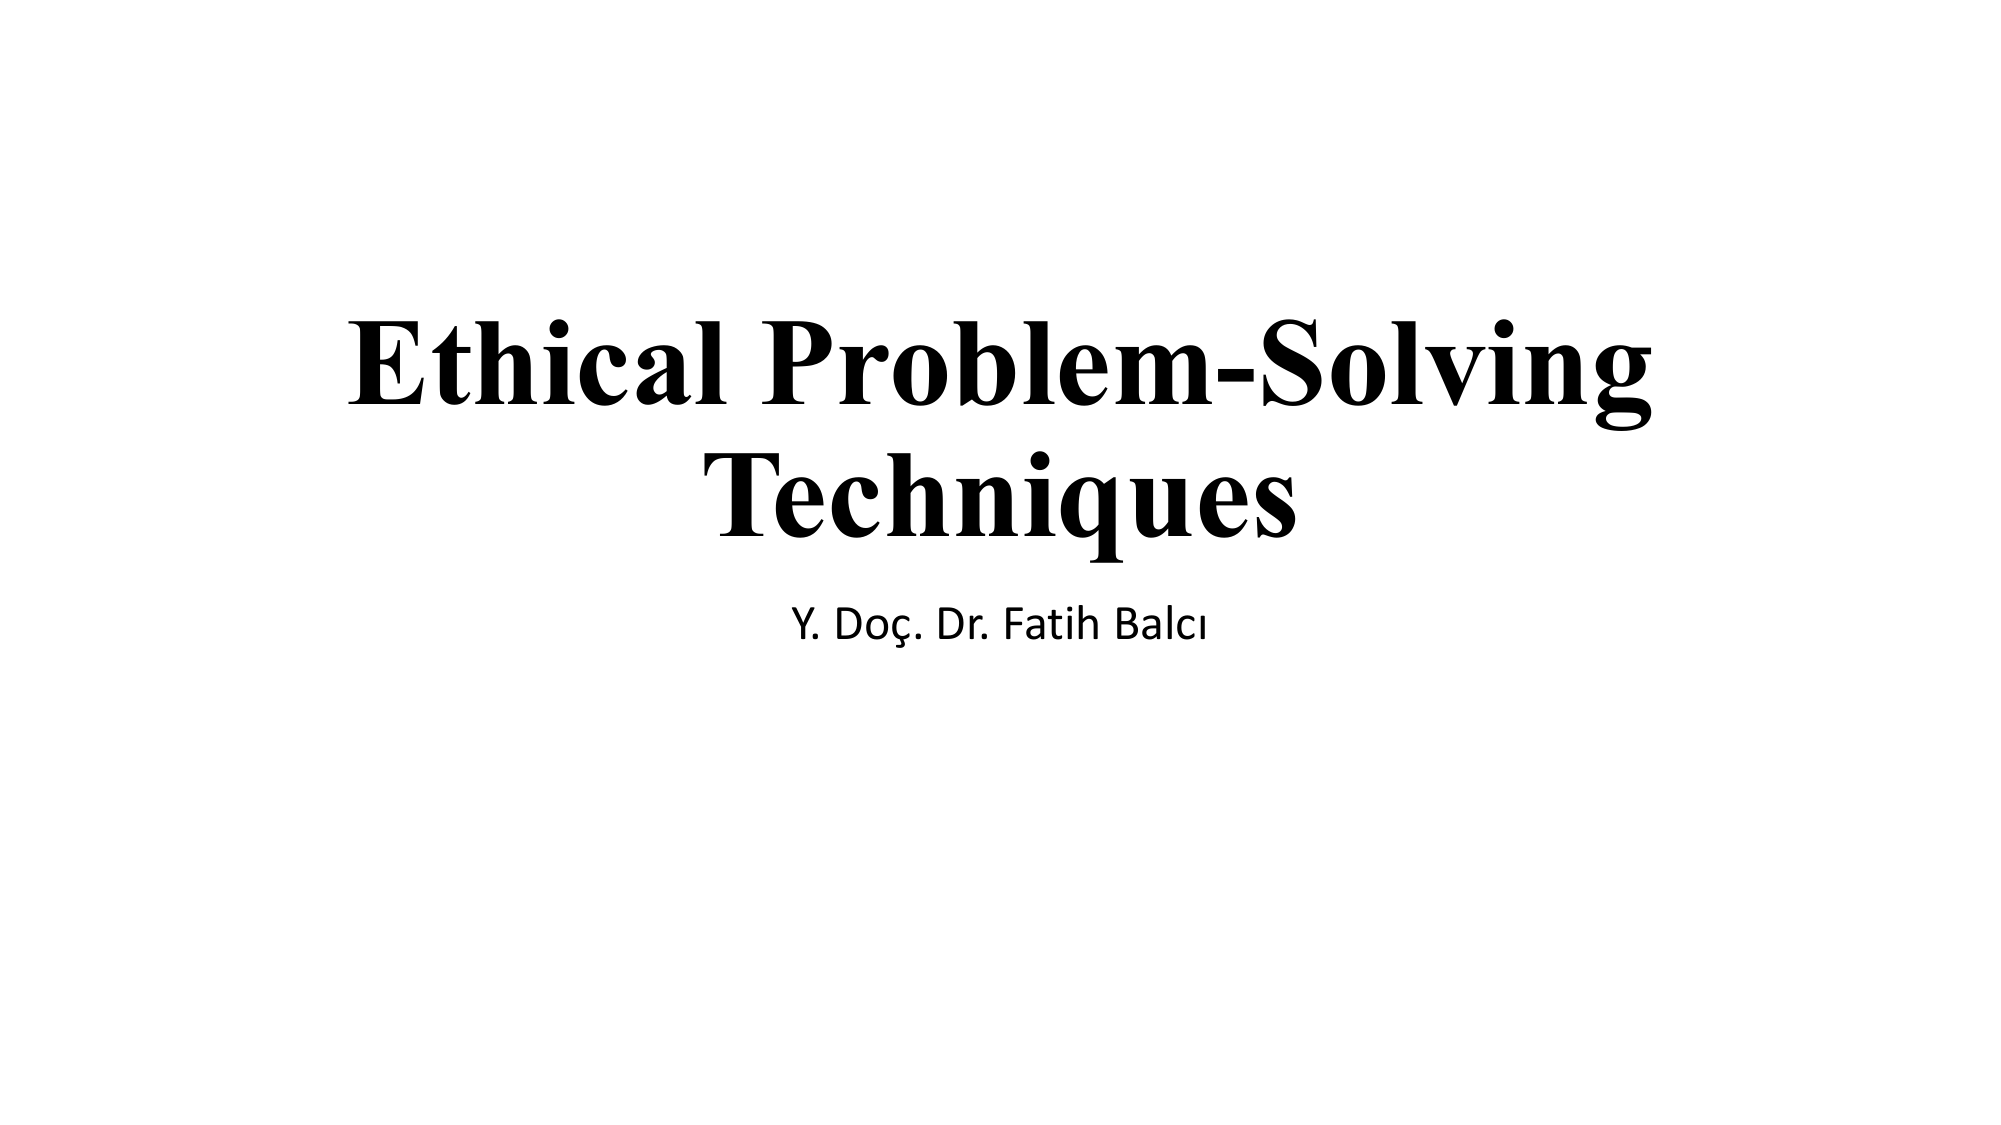 nasw essential steps for ethical problem solving